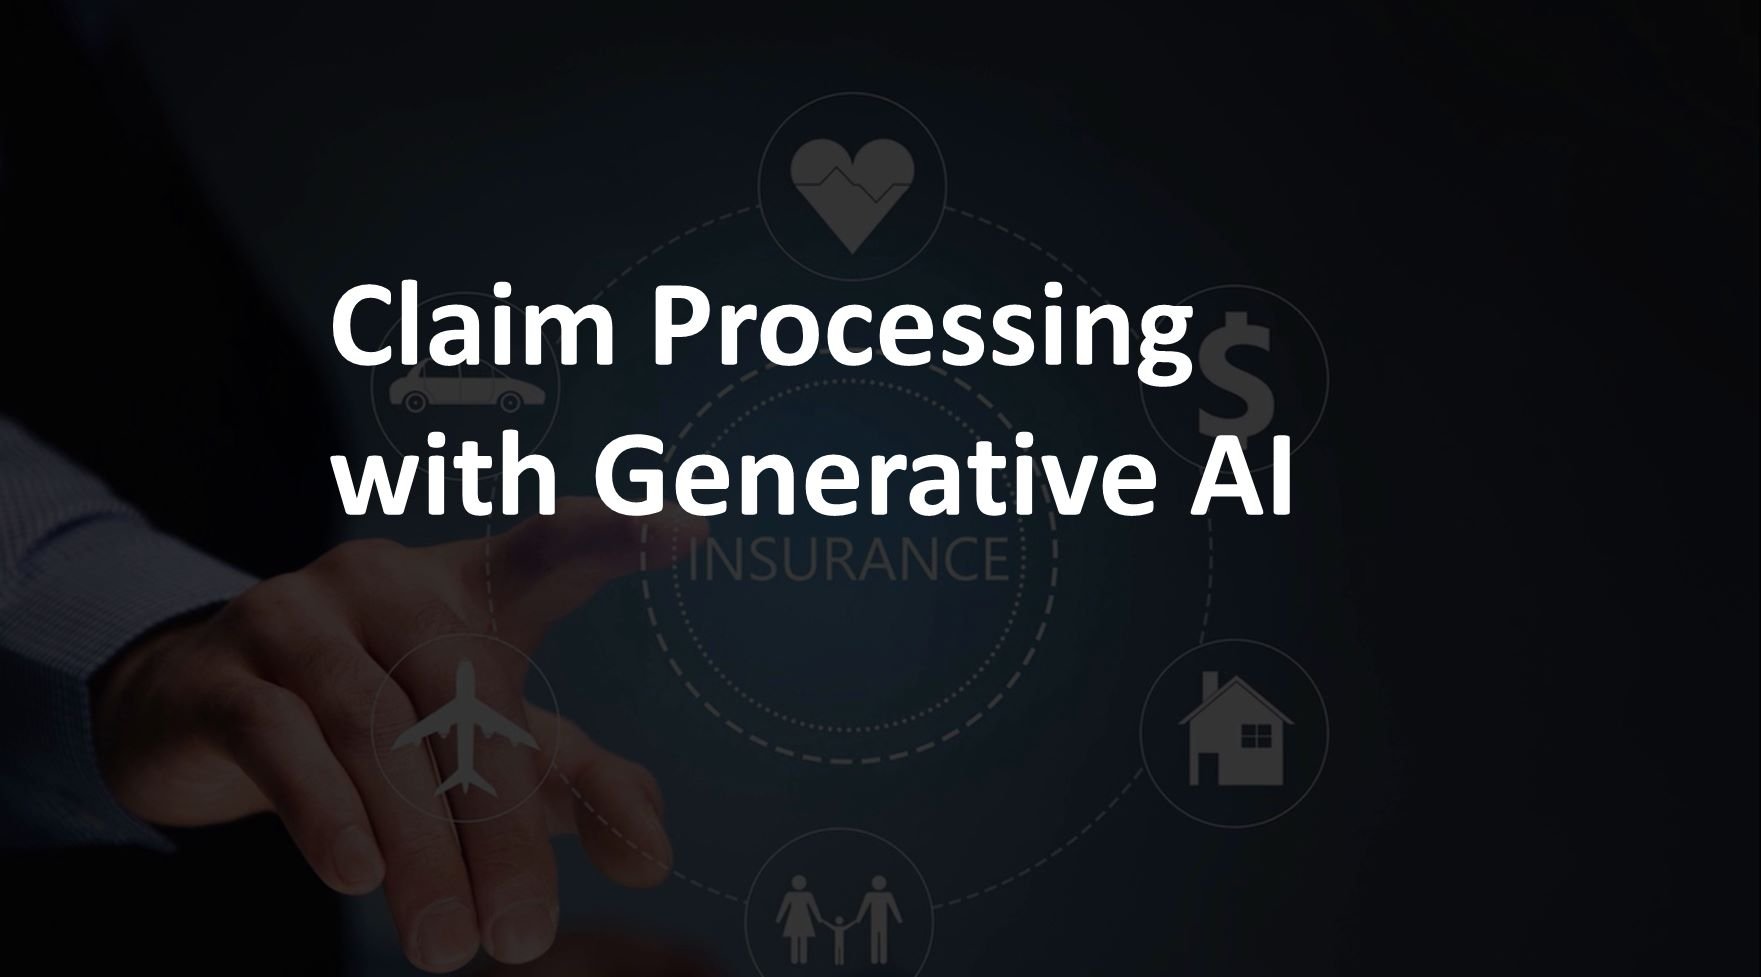 Claims Processing with Generative AI